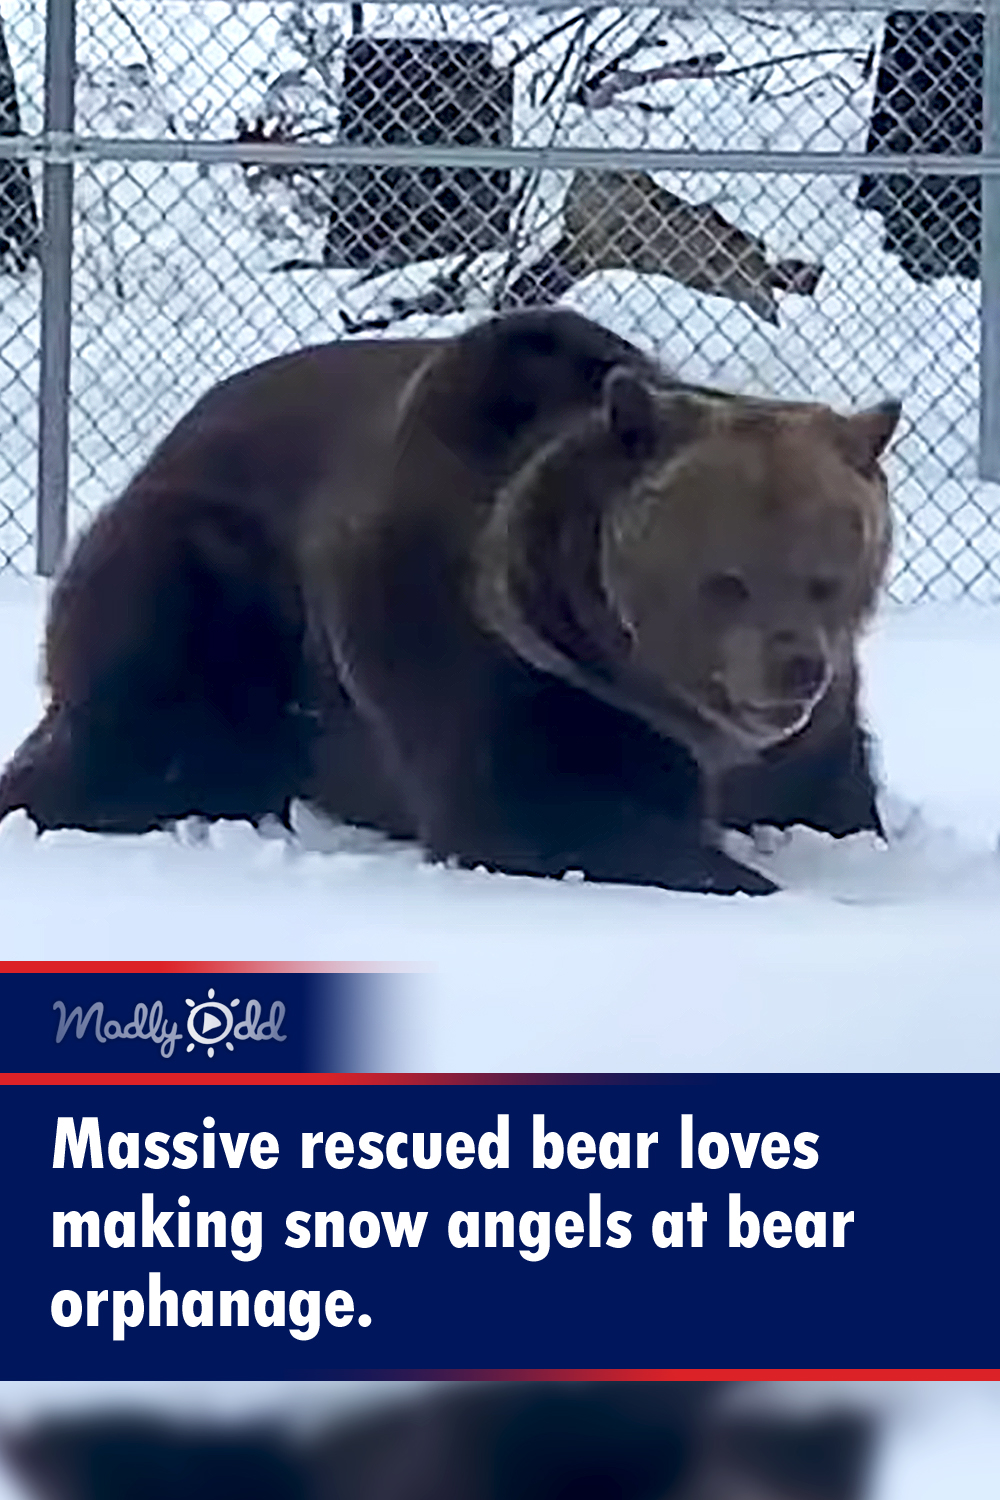 Massive rescued bear loves making snow angels at bear orphanage